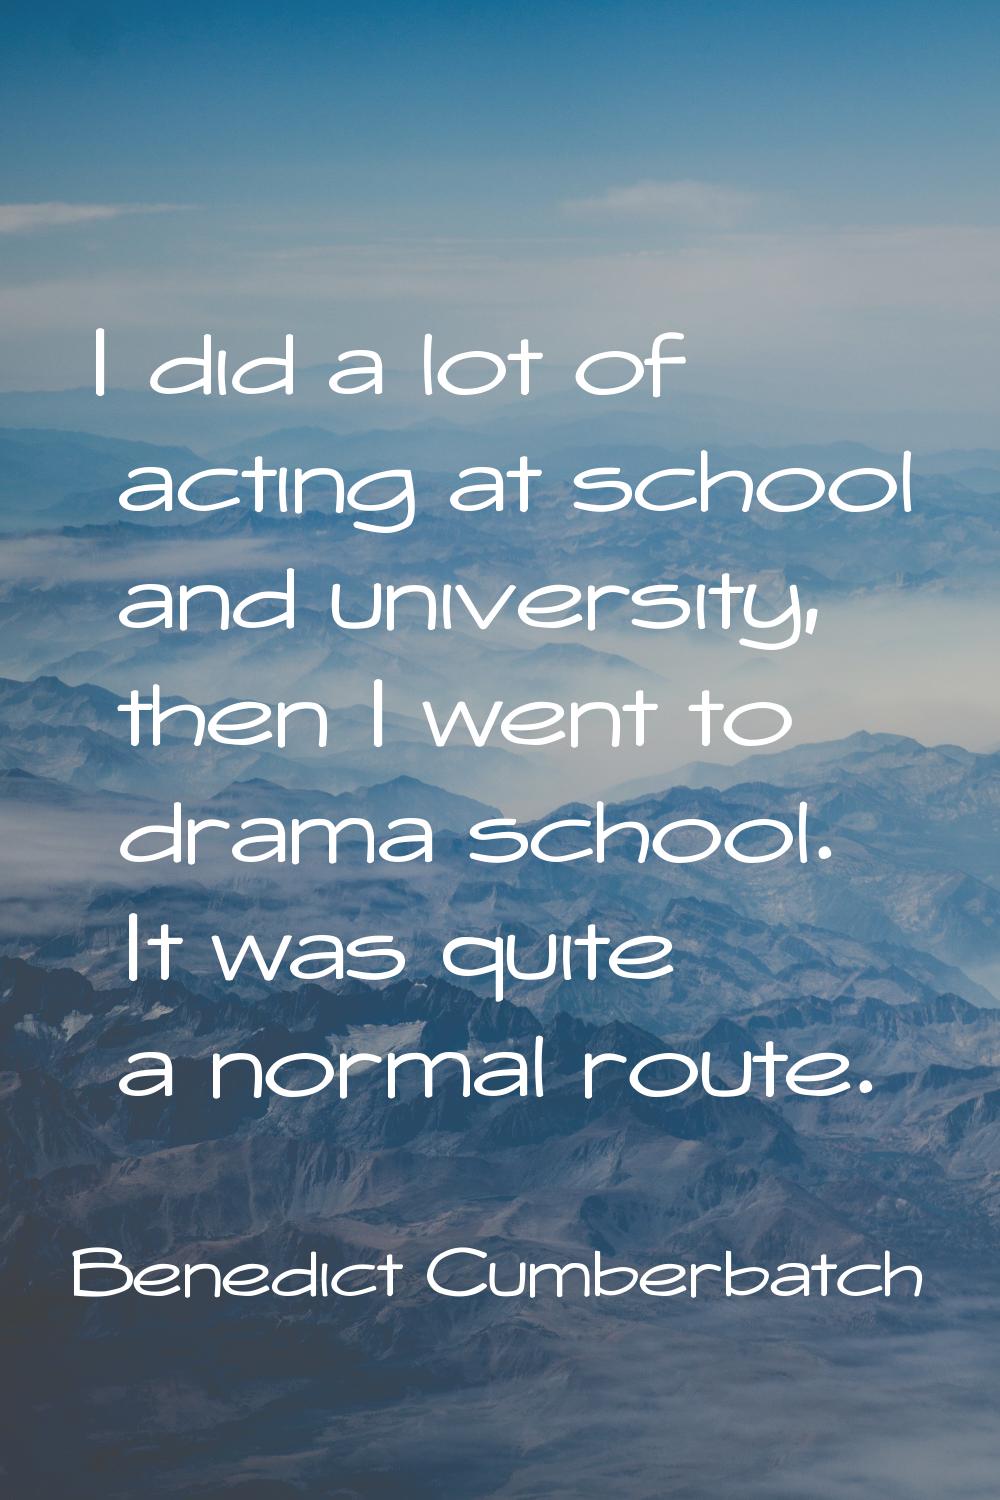 I did a lot of acting at school and university, then I went to drama school. It was quite a normal 